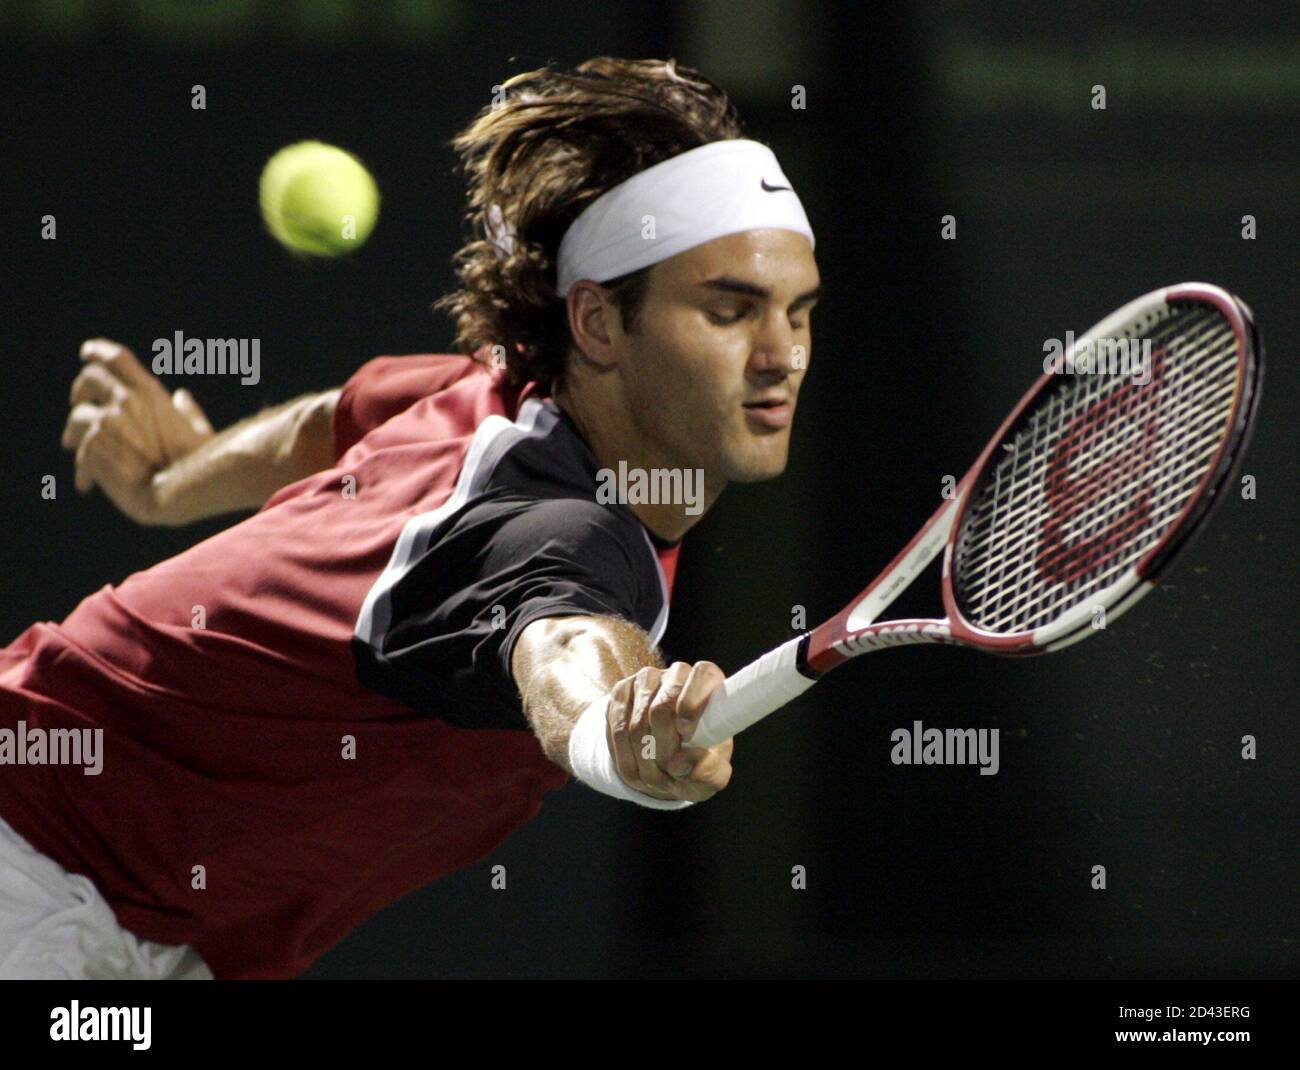 Roger Federer from Switzerland follows through on a backhand shot against  Andre Agassi of the U.S. during their semifinal match at the NASDAQ-100  tennis tournament in Key Biscayne, Florida April 1, 2005.